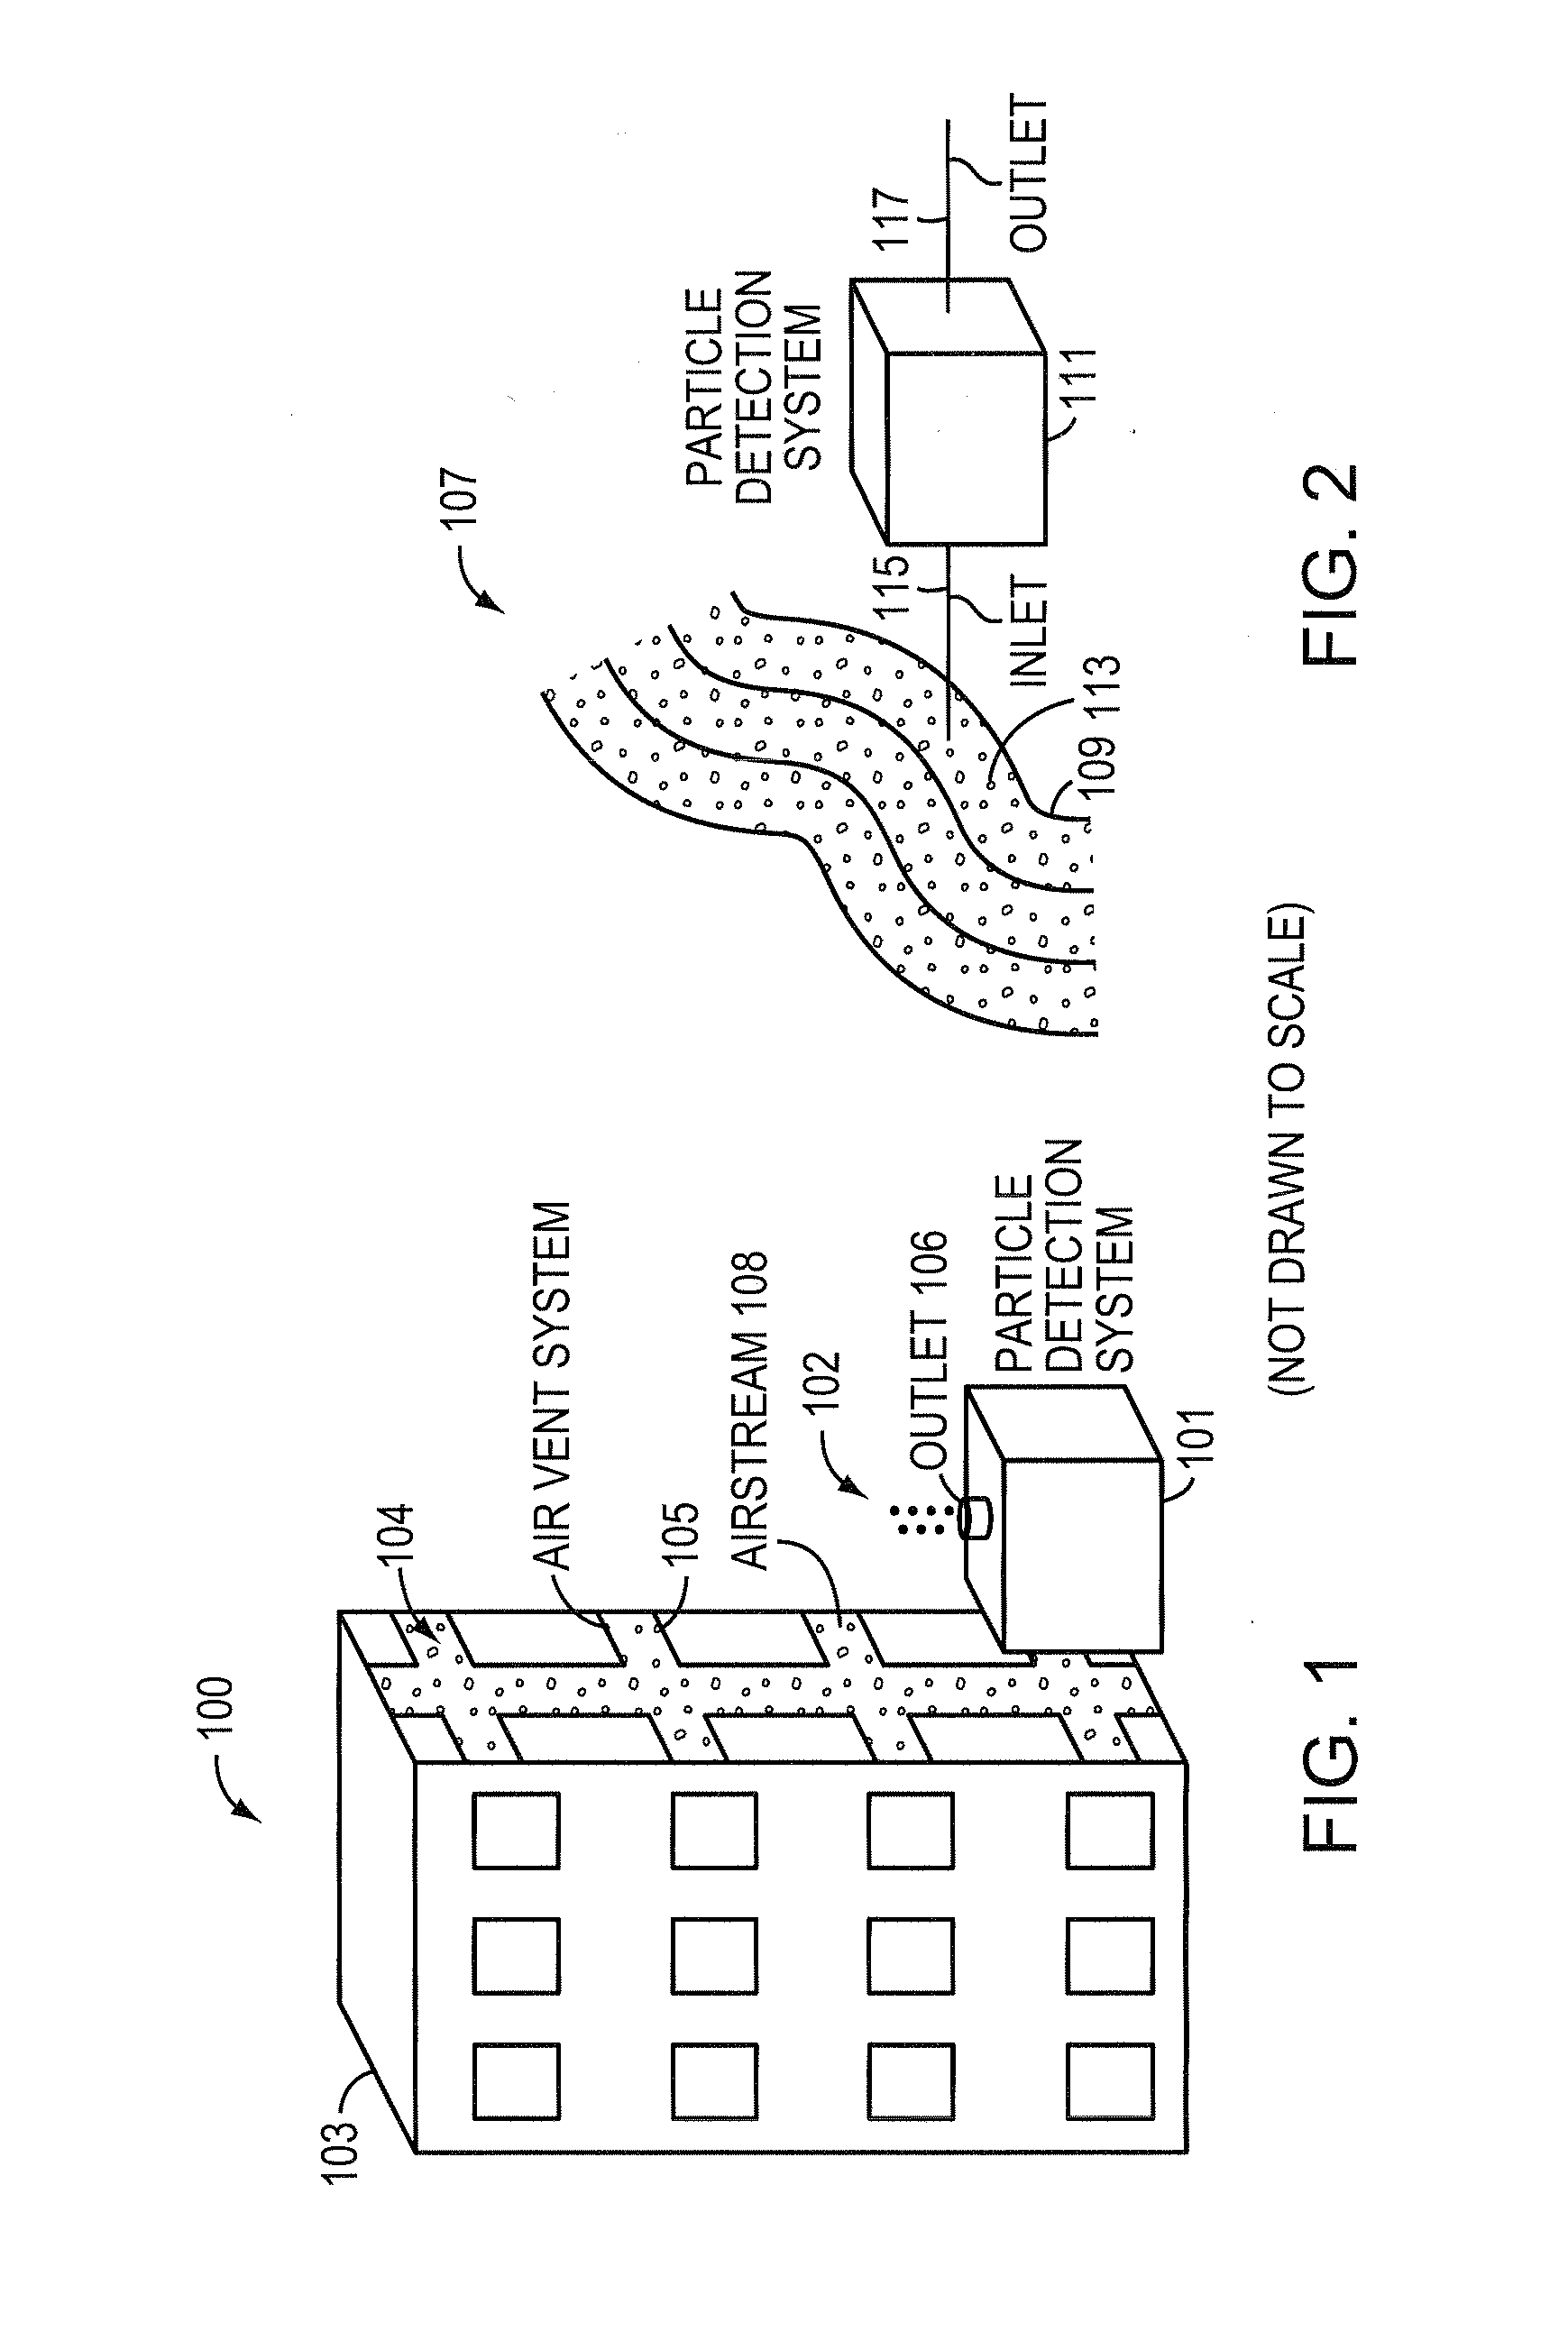 Method and apparatus for detecting and discriminating particles in a fluid